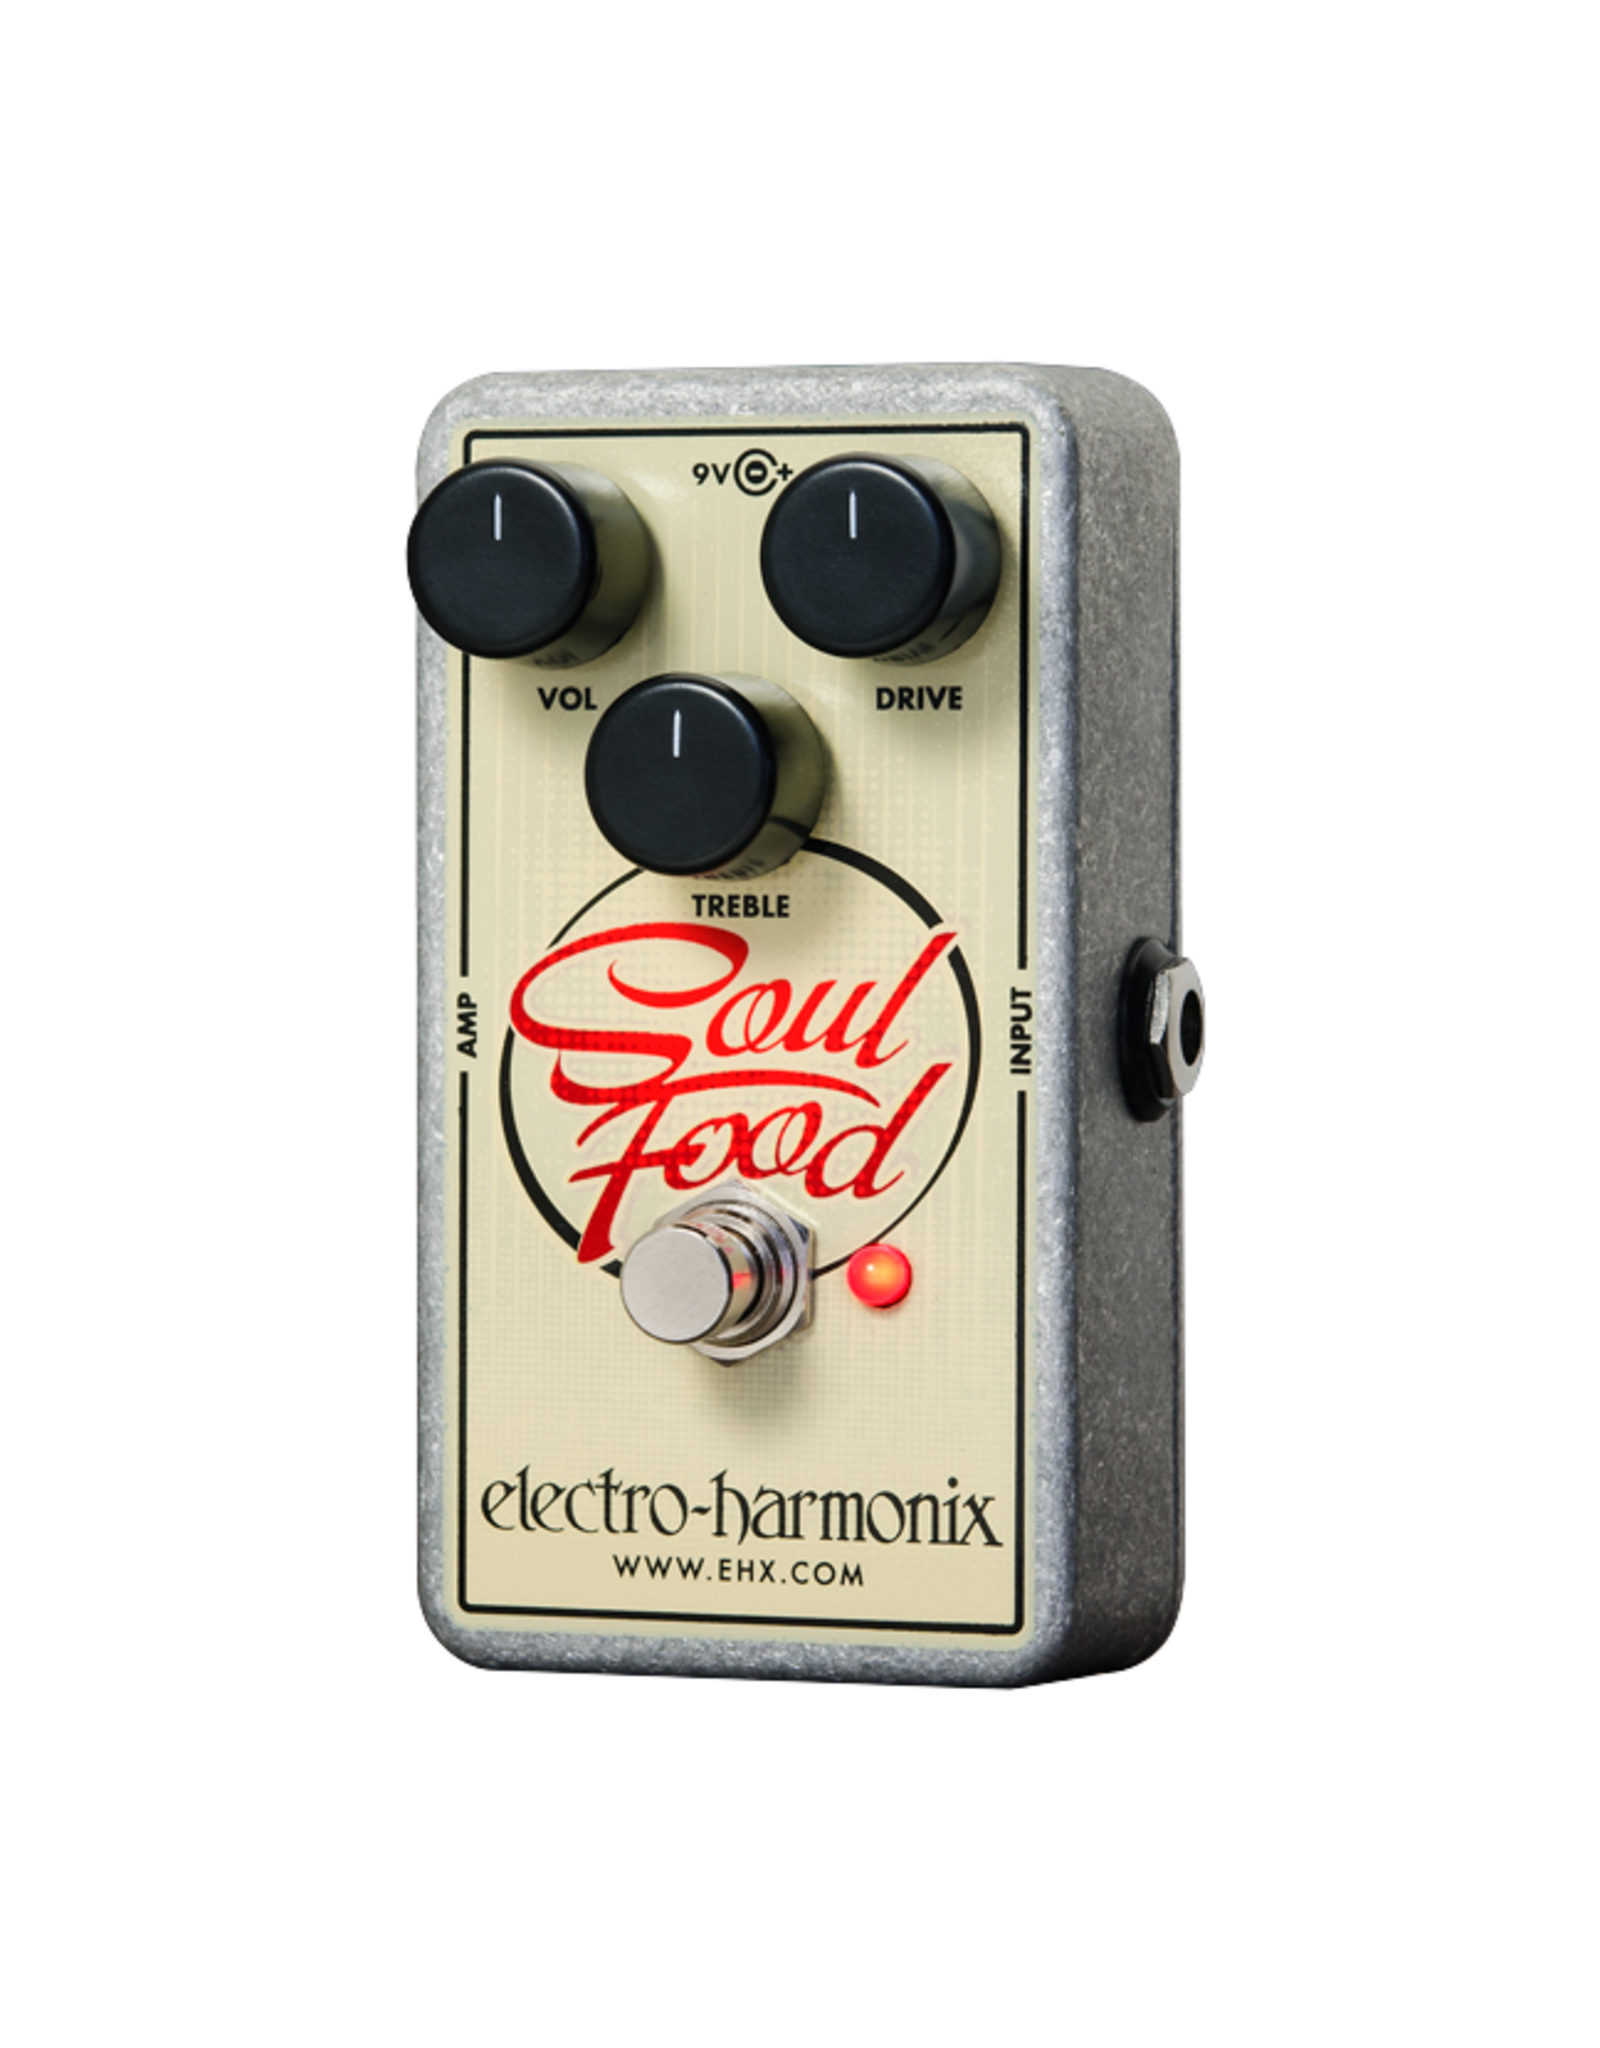 Electro-Harmonix EHX SOUL FOOD Transparent overdrive, 9.6DC-200 PSU included